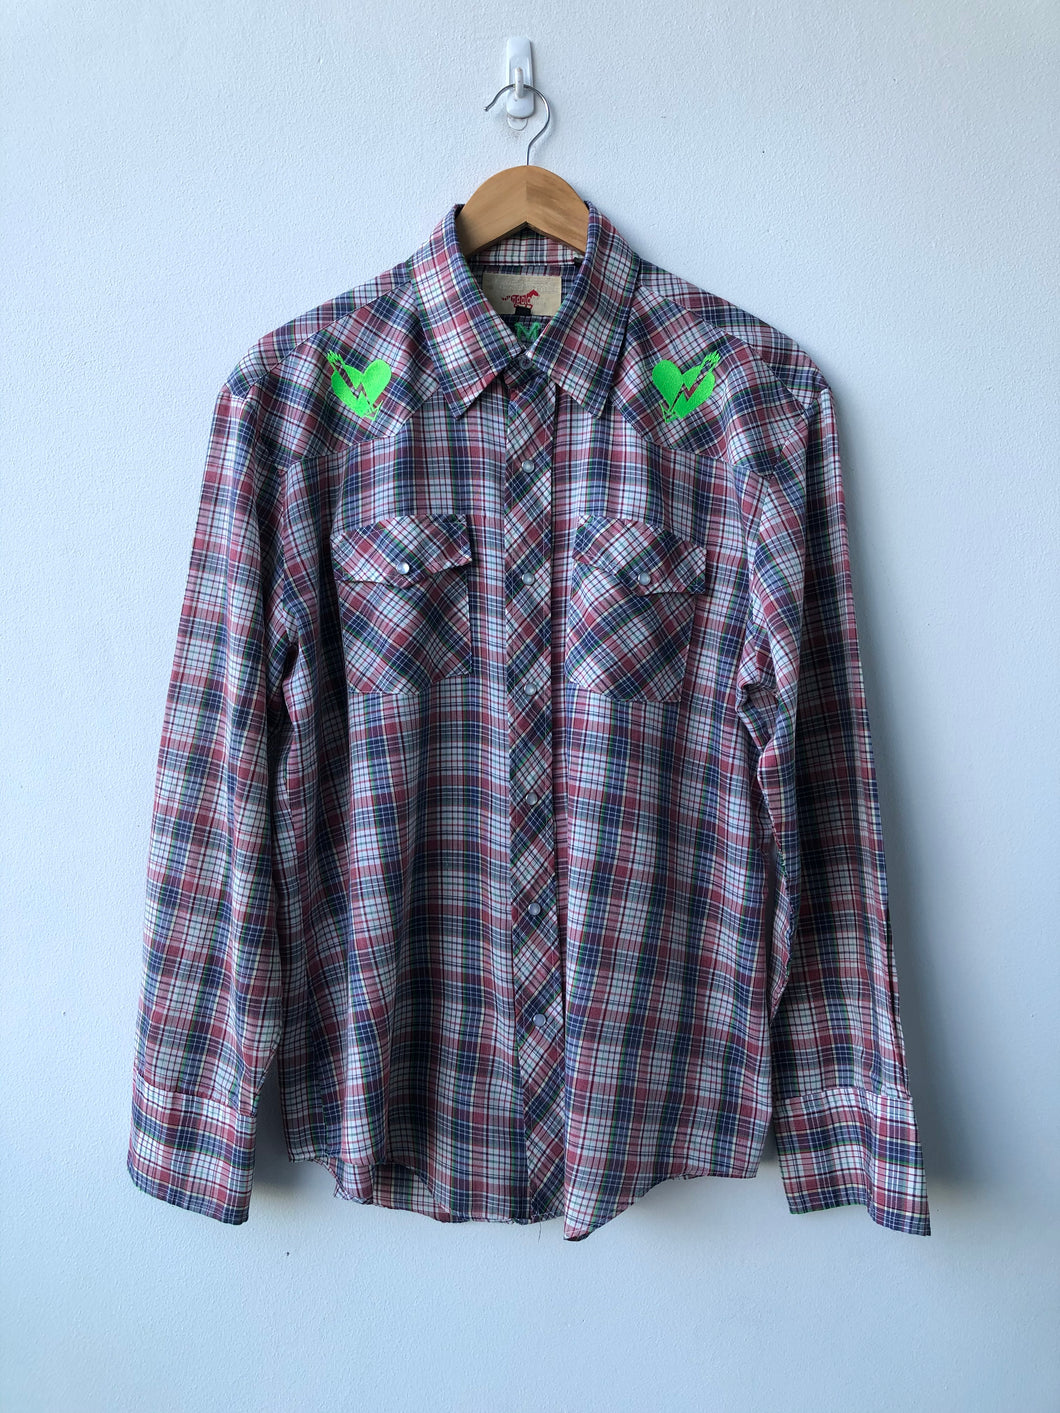 FM WESTERN - Vintage Youngbloods Westernwear Shirt w Neon Green embroidery